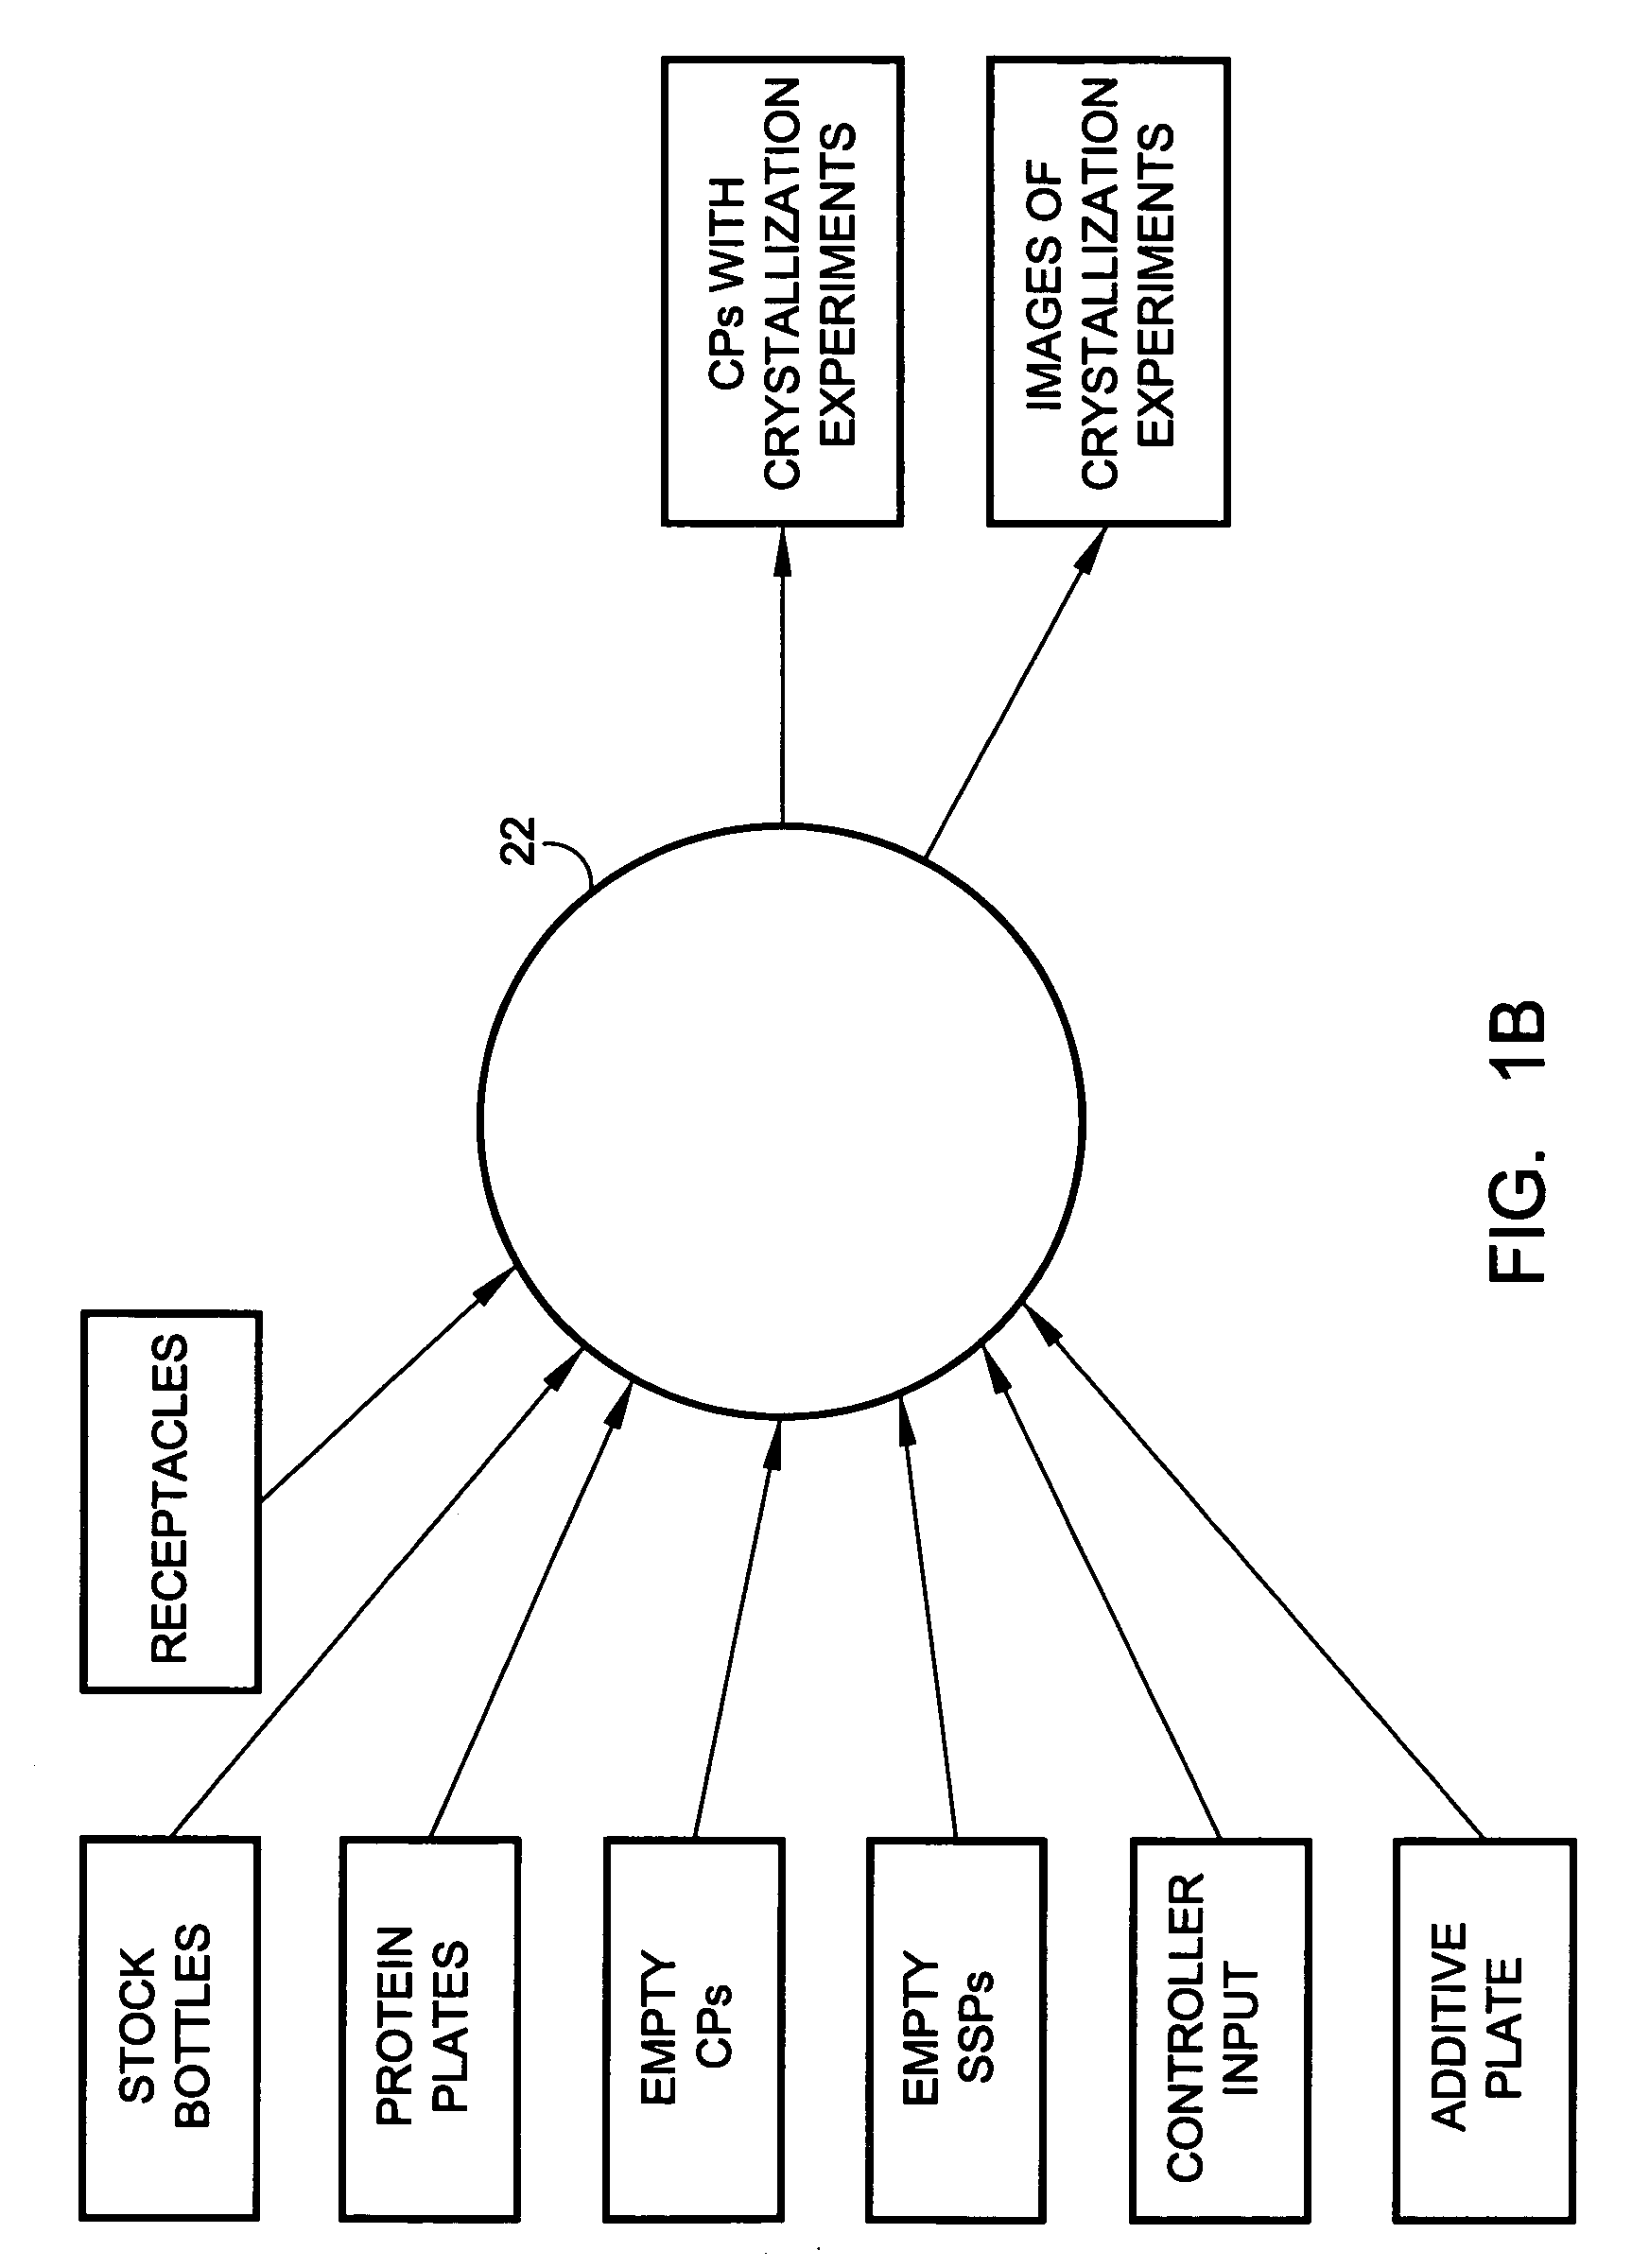 Method for performing crystallization trials